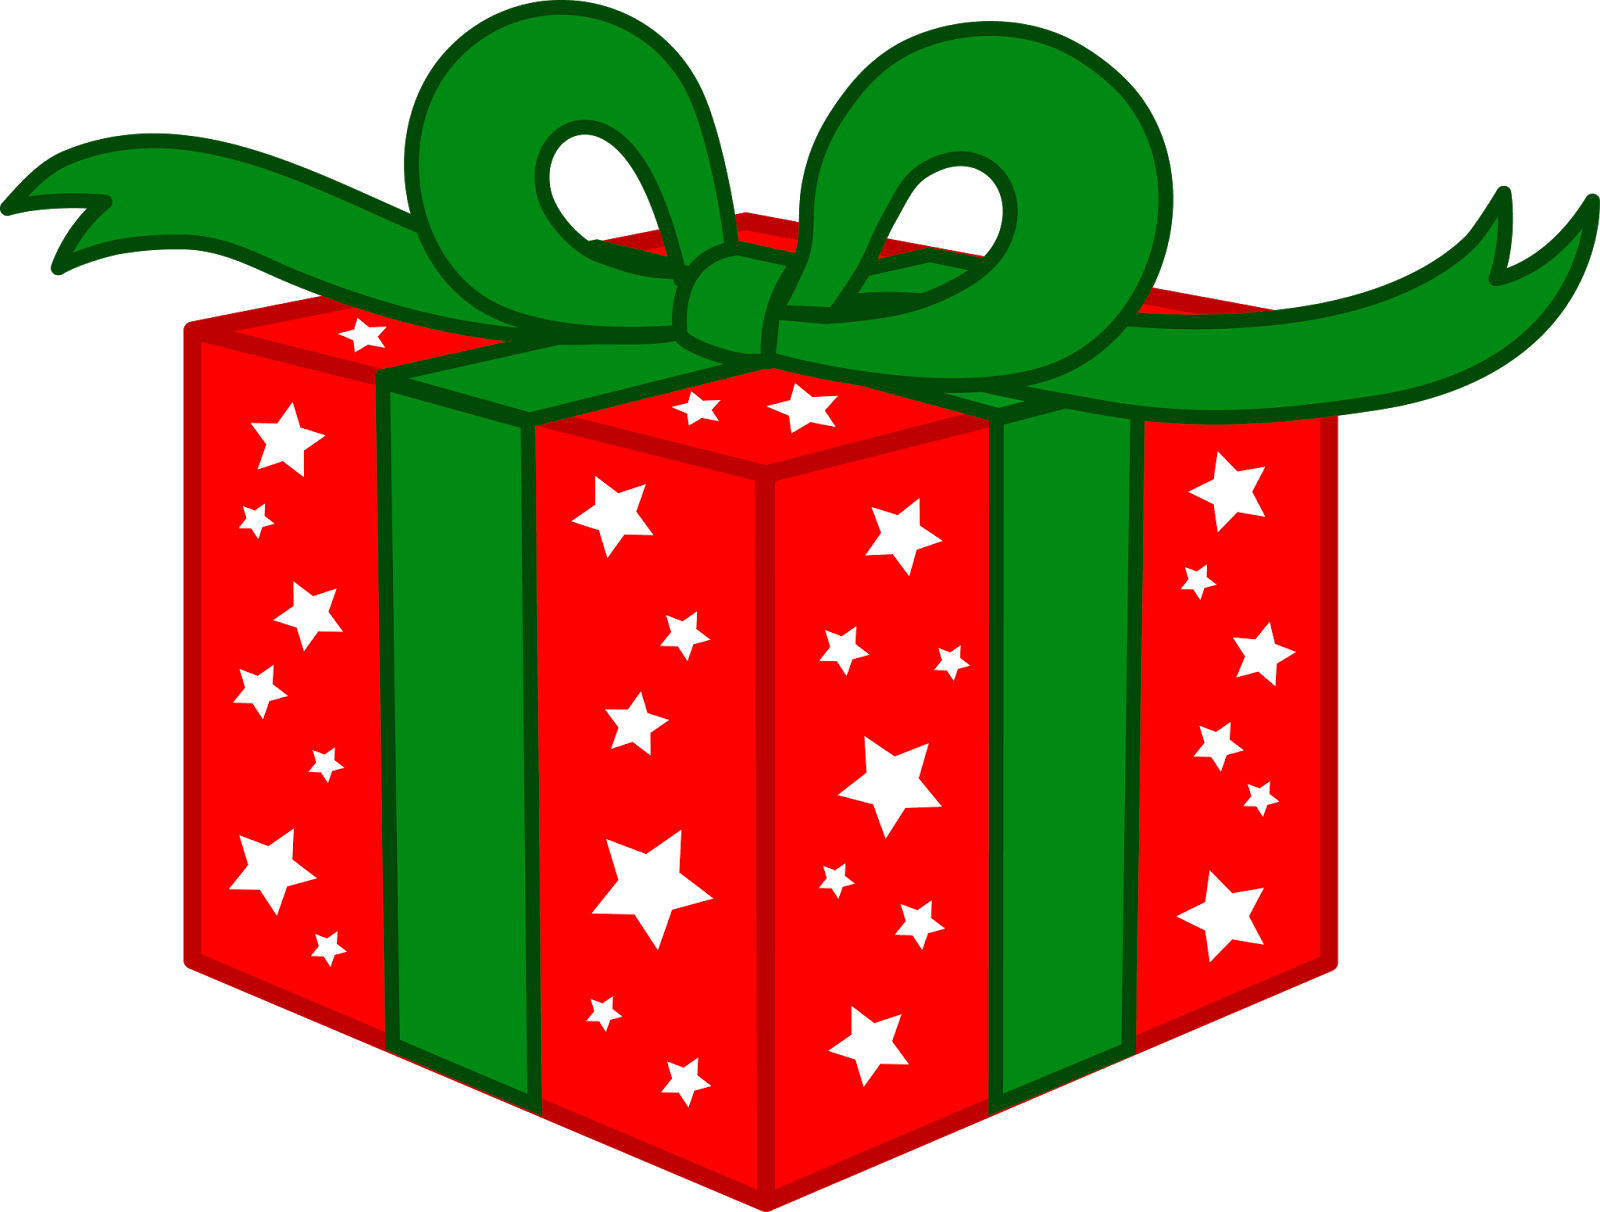 gifts clipart coloring sheet